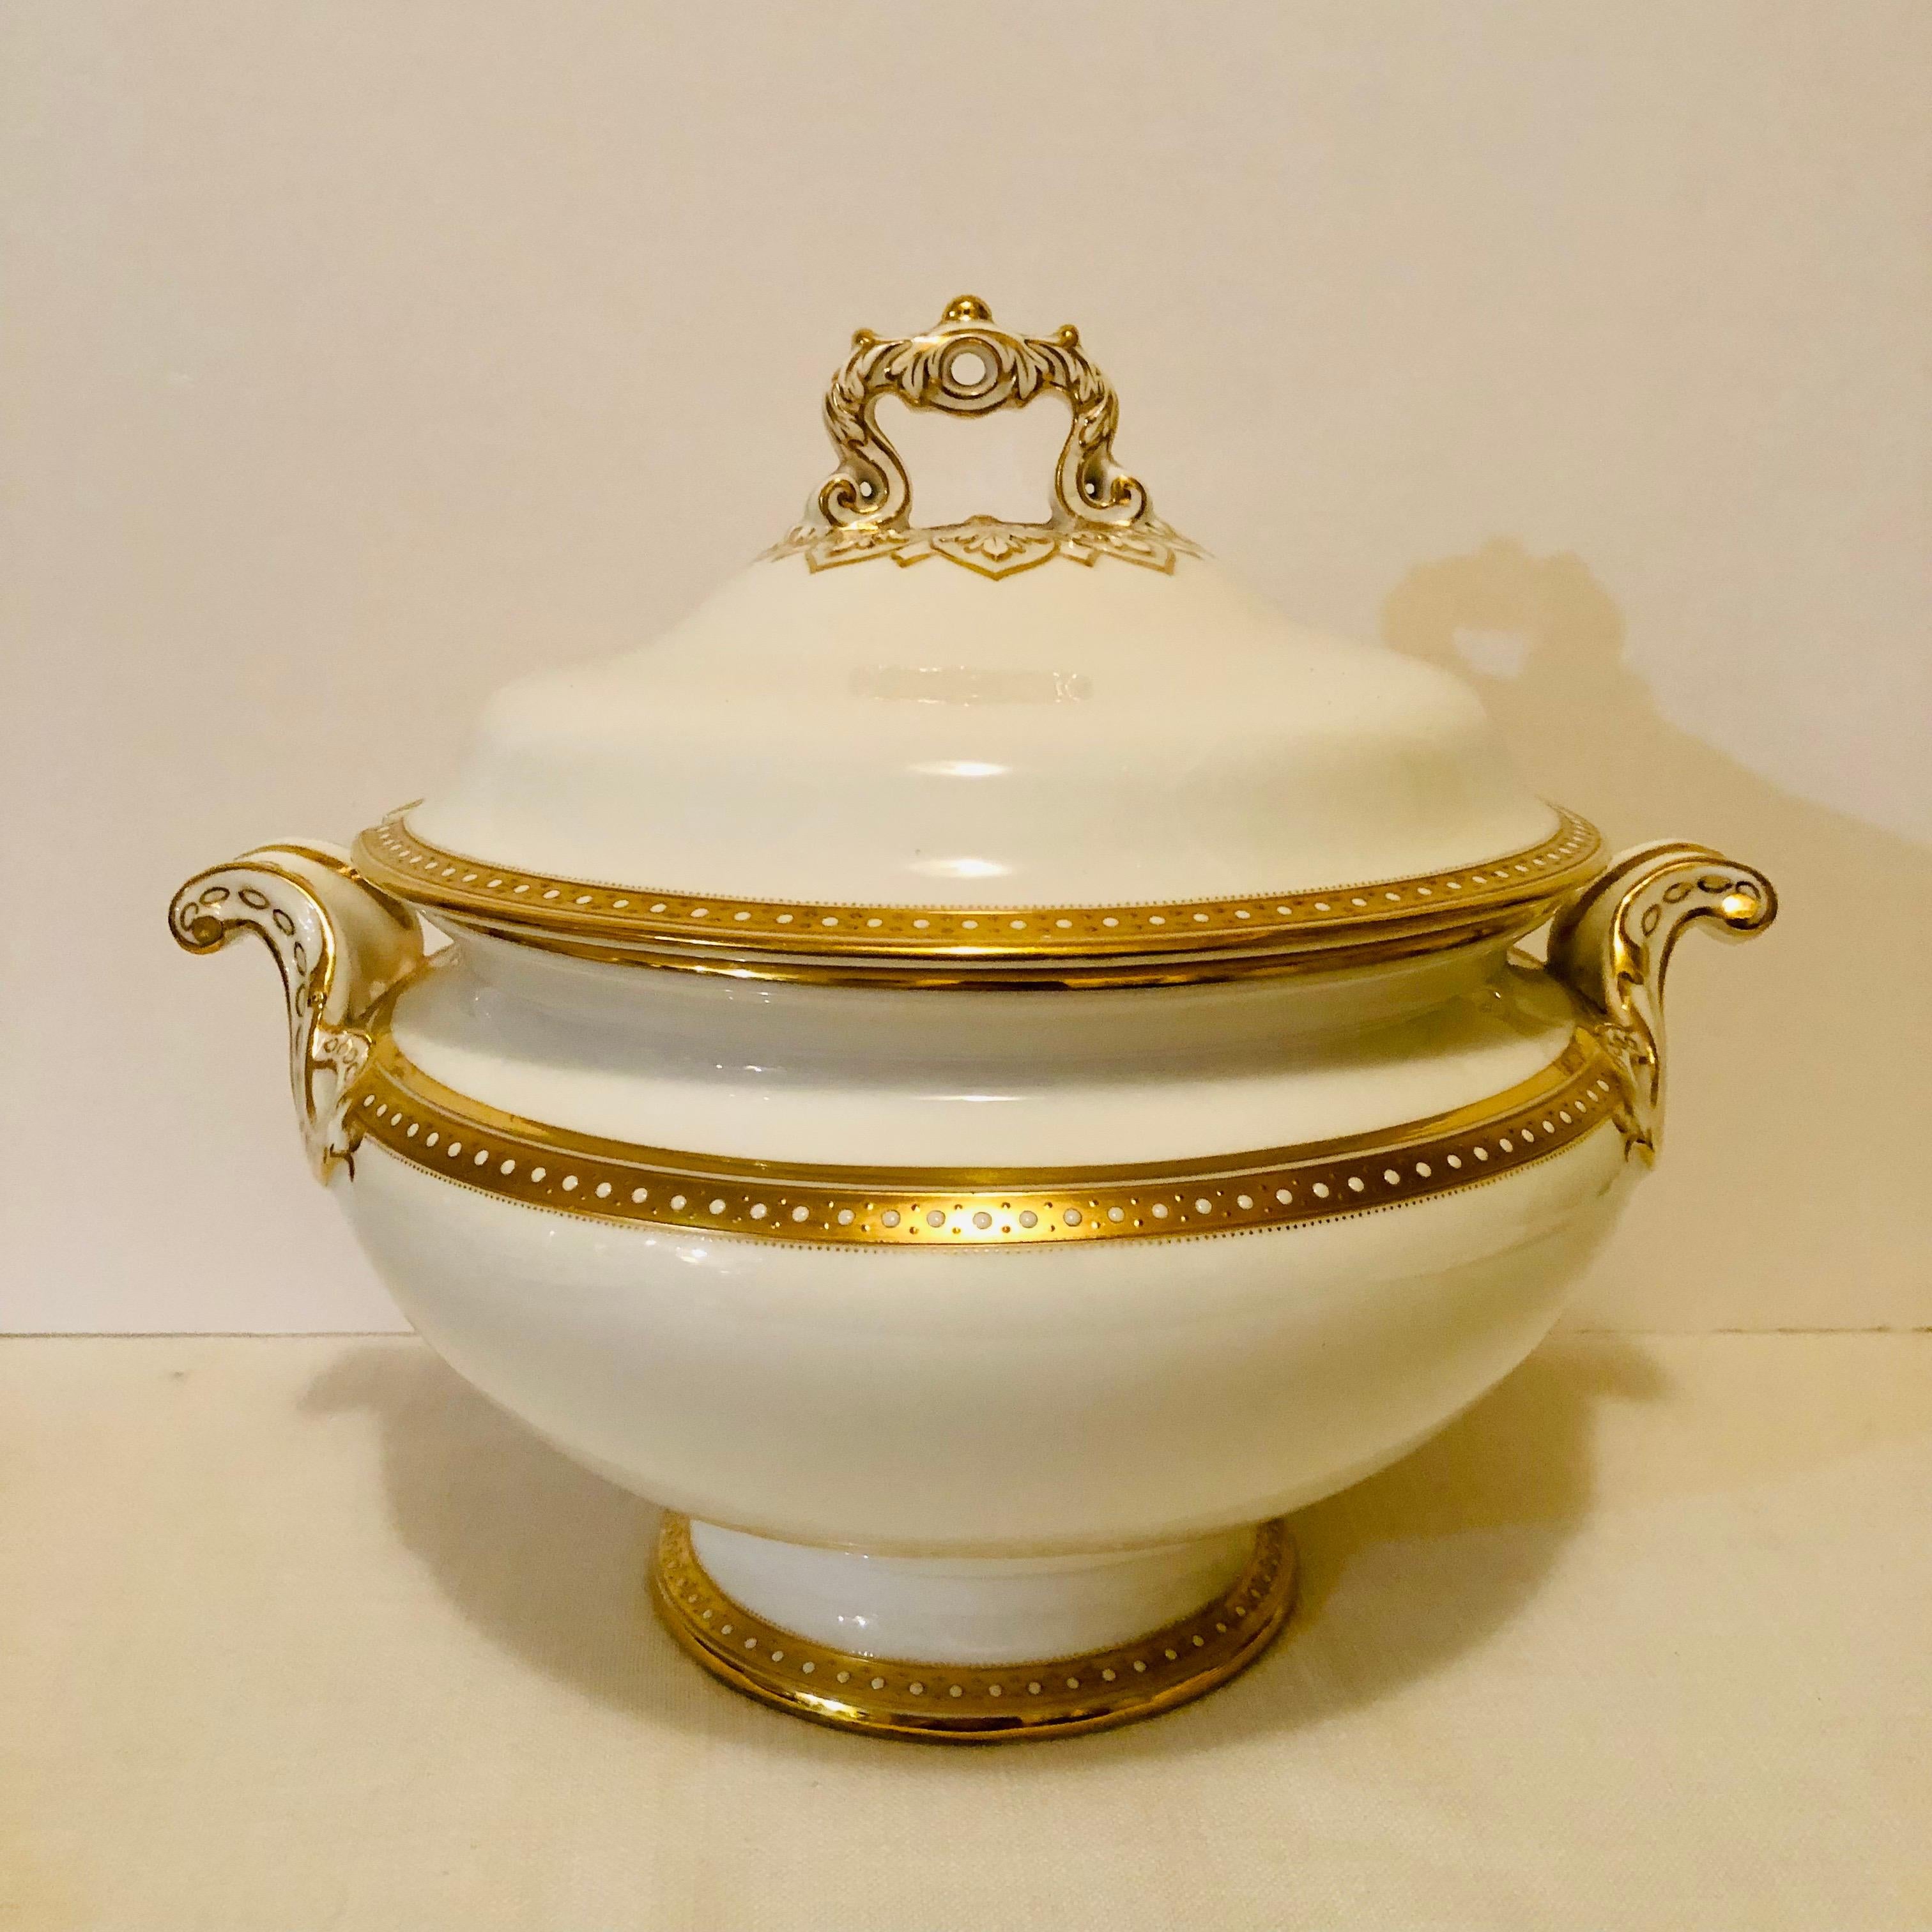 Exquisite Spode Copeland soup tureen with gold borders and white enamel jeweling on a white porcelain body. This gorgeous large soup tureen exemplifies simple elegance, and it would look wonderful with any dinner service. Look at the picture of the